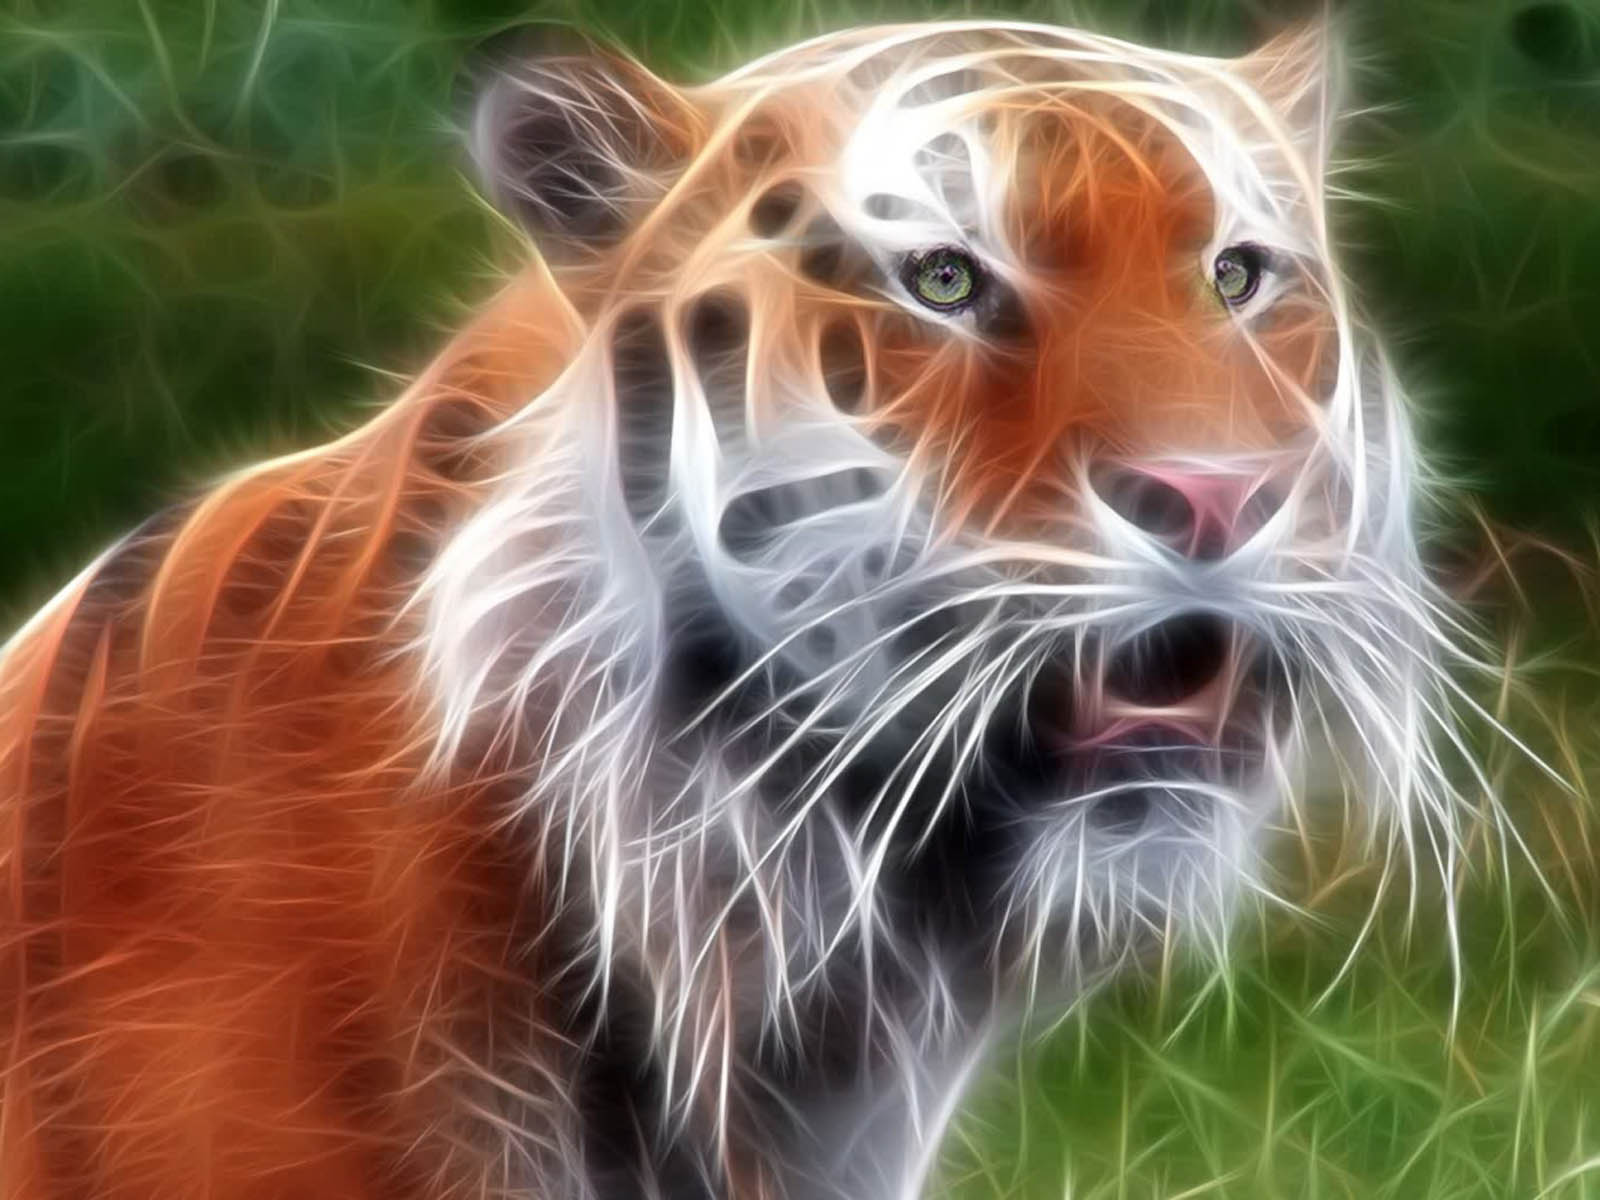  wallpapers  Tiger 3D  Wallpapers 